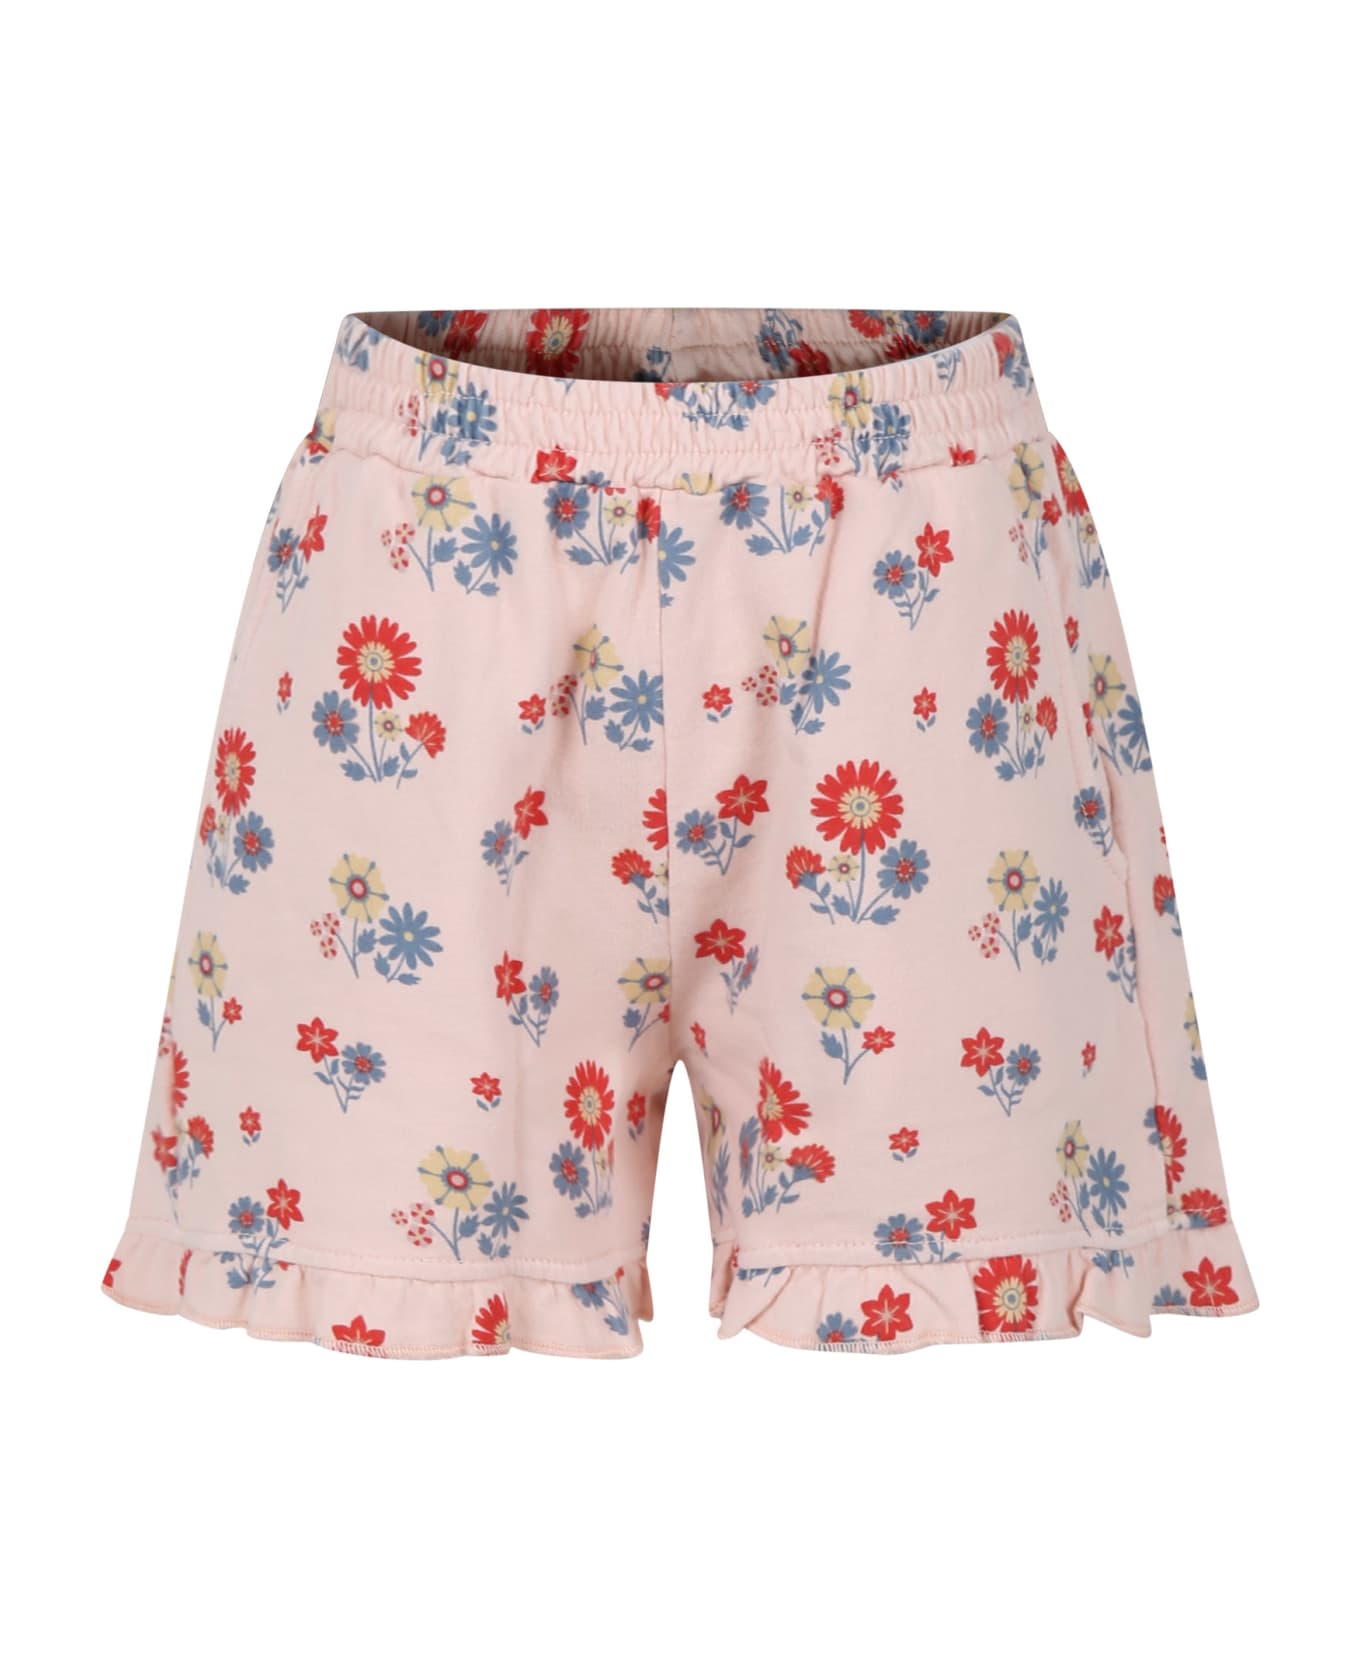 Coco Au Lait Pink Shorts For Girl With Flowers Print - Pink